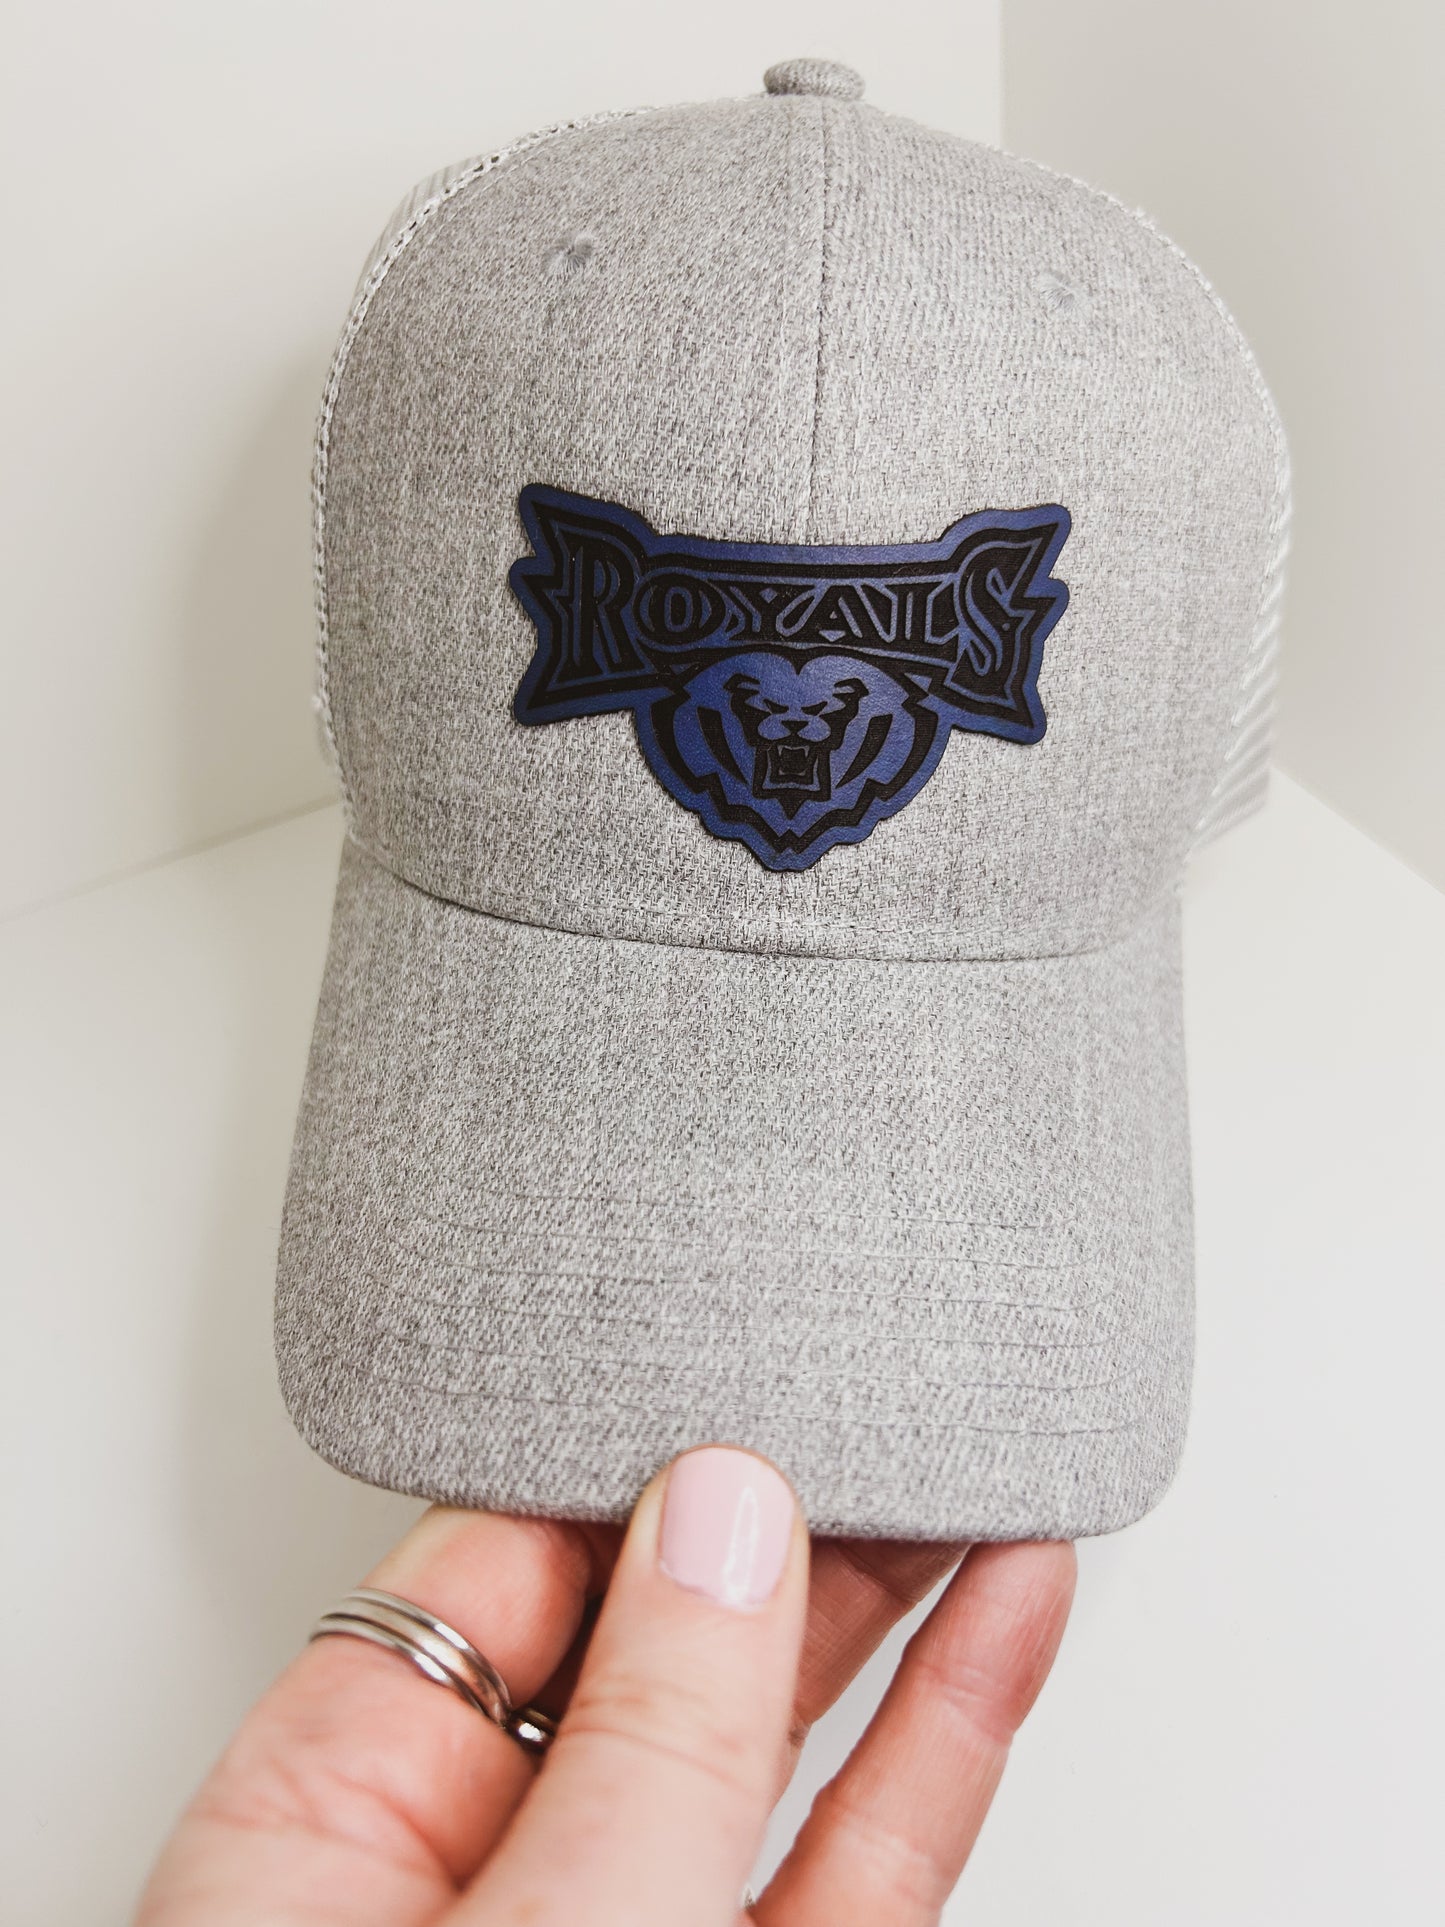 HSE Royals - Heather Gray Baseball Hat - Royals Patch